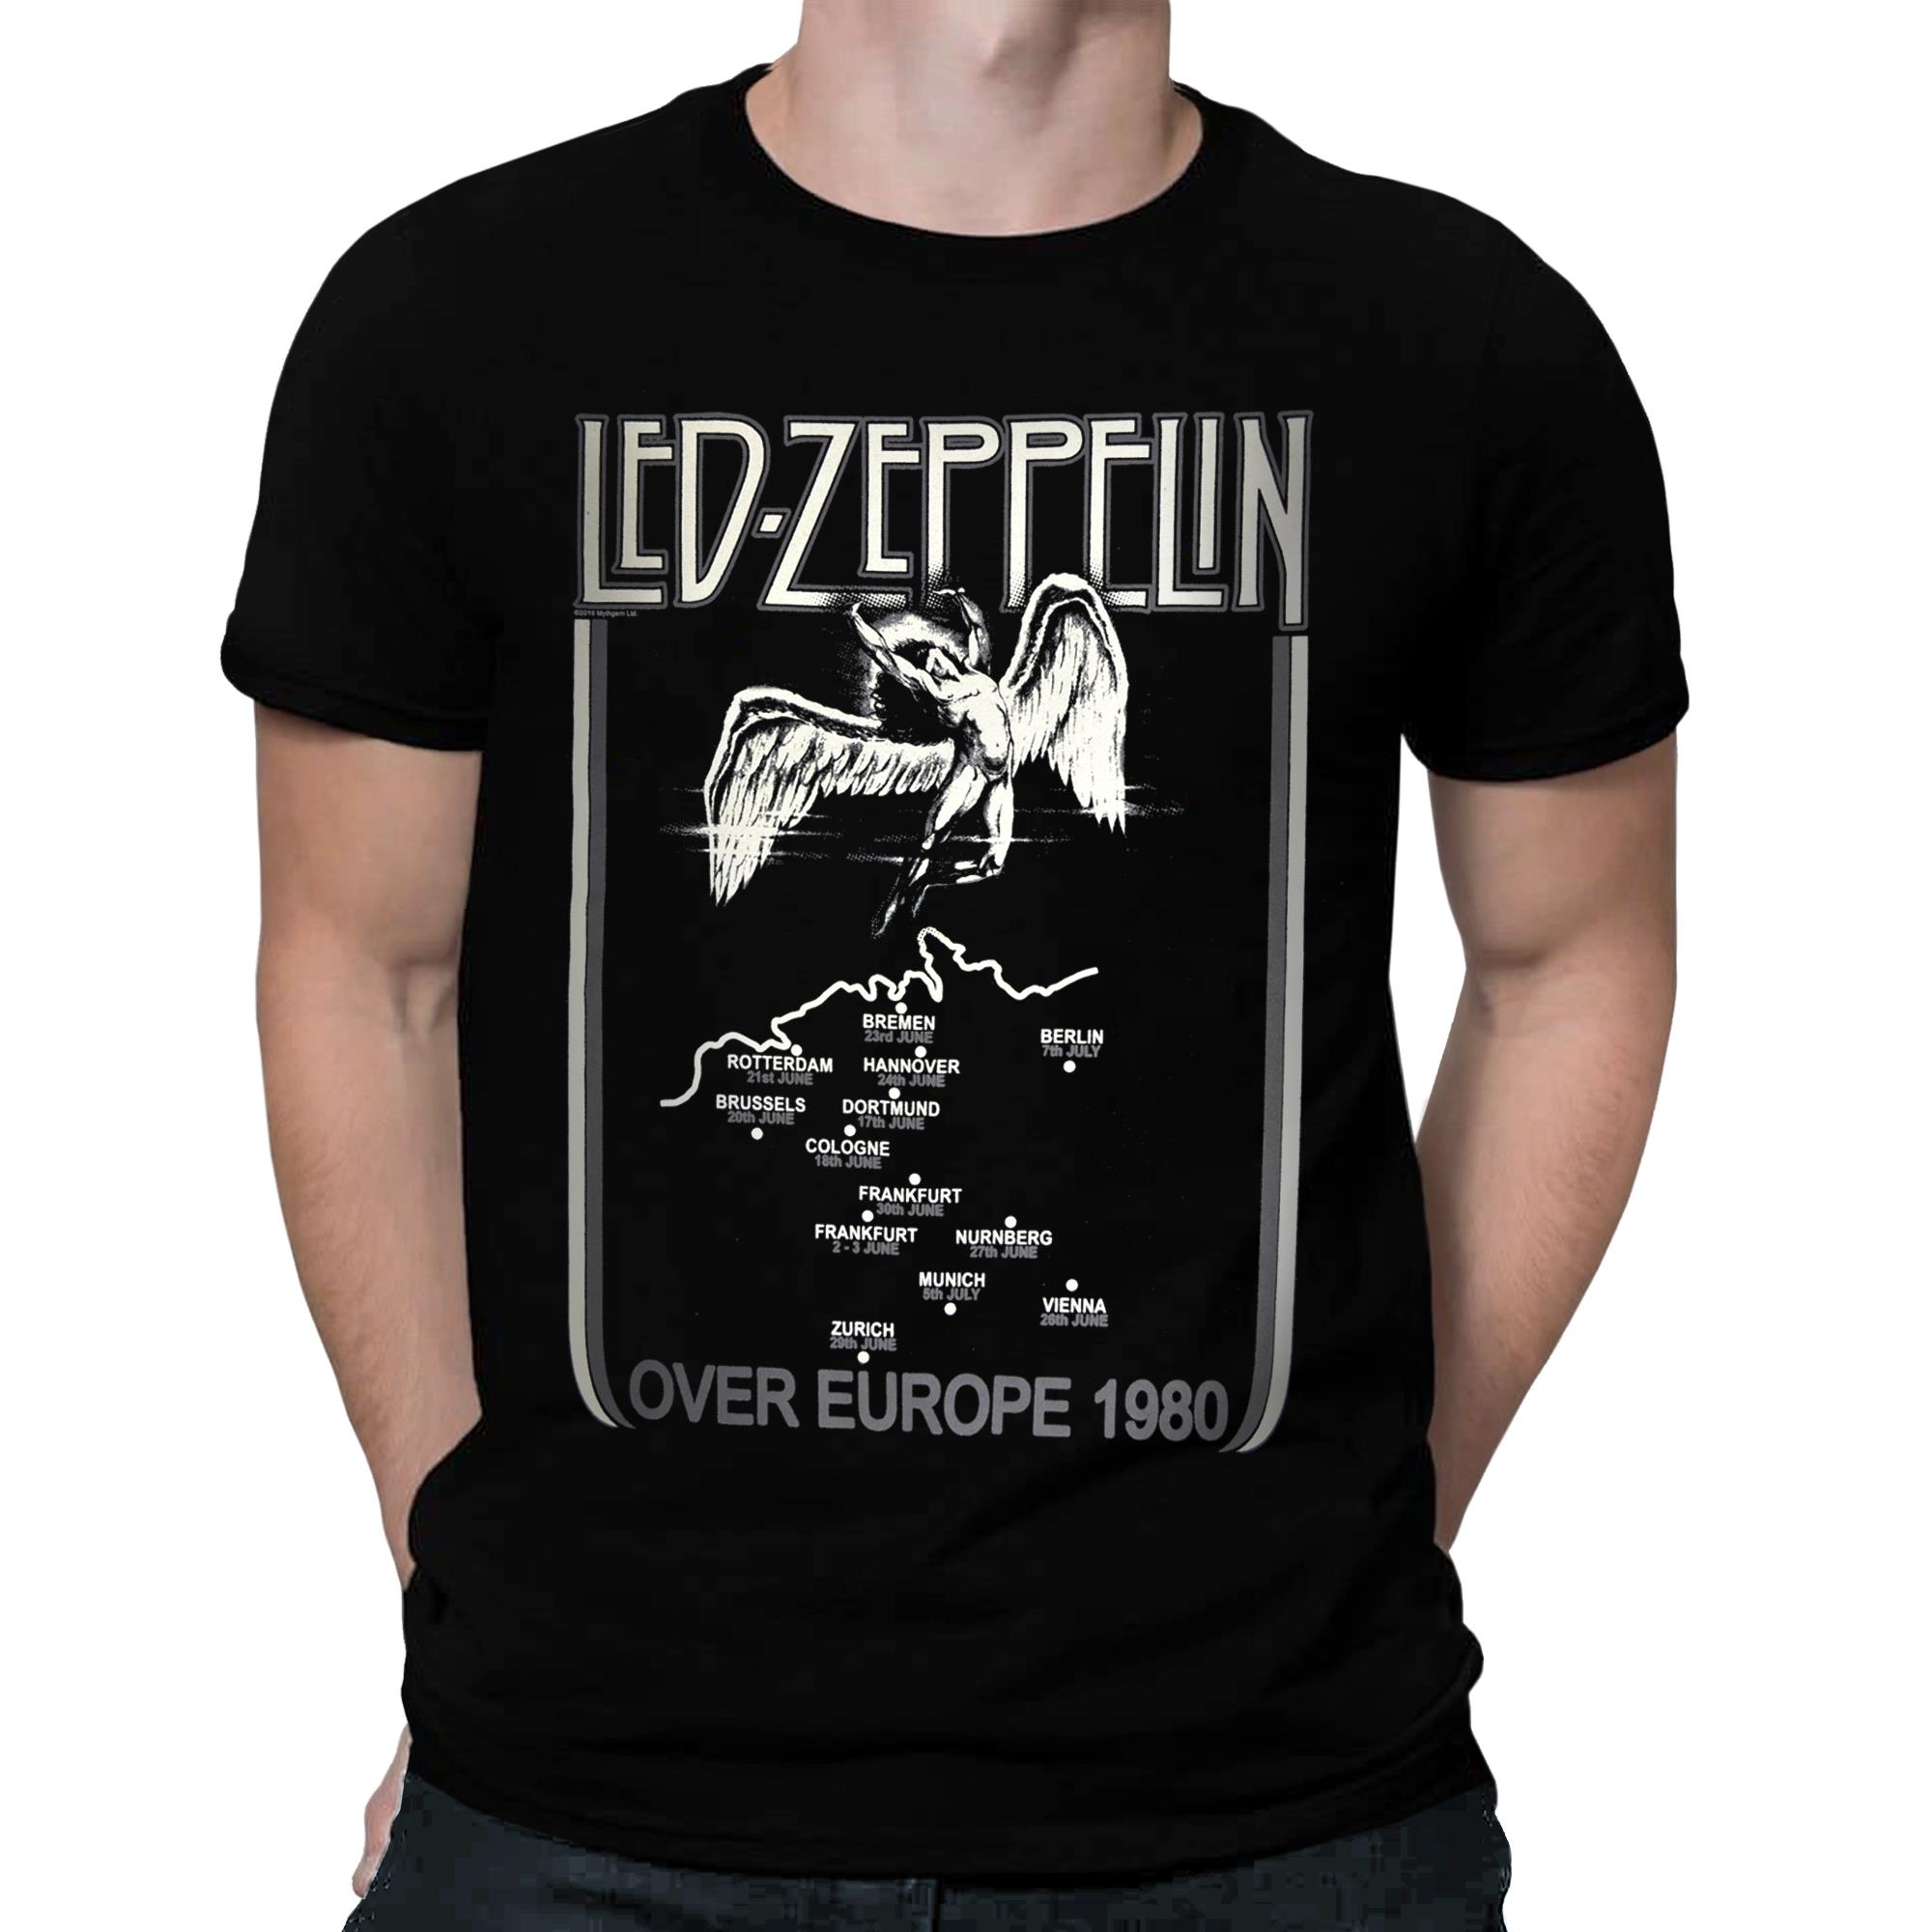 Over Europe 1980 T-Shirt